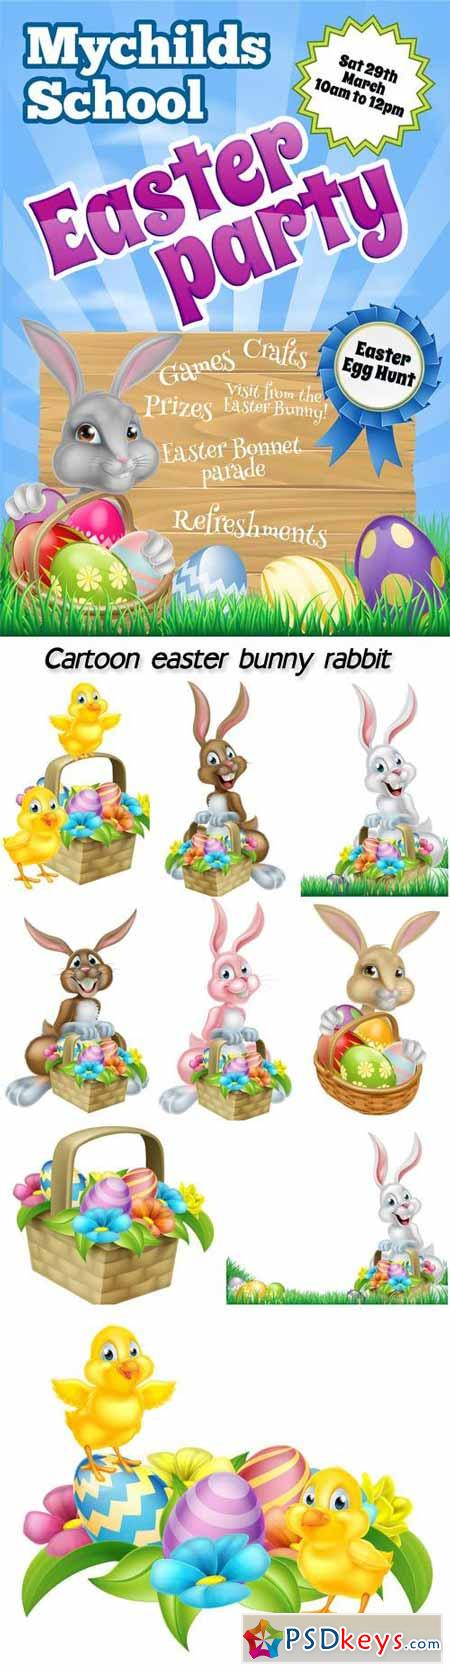 Cartoon easter bunny rabbit, chicks and easter eggs